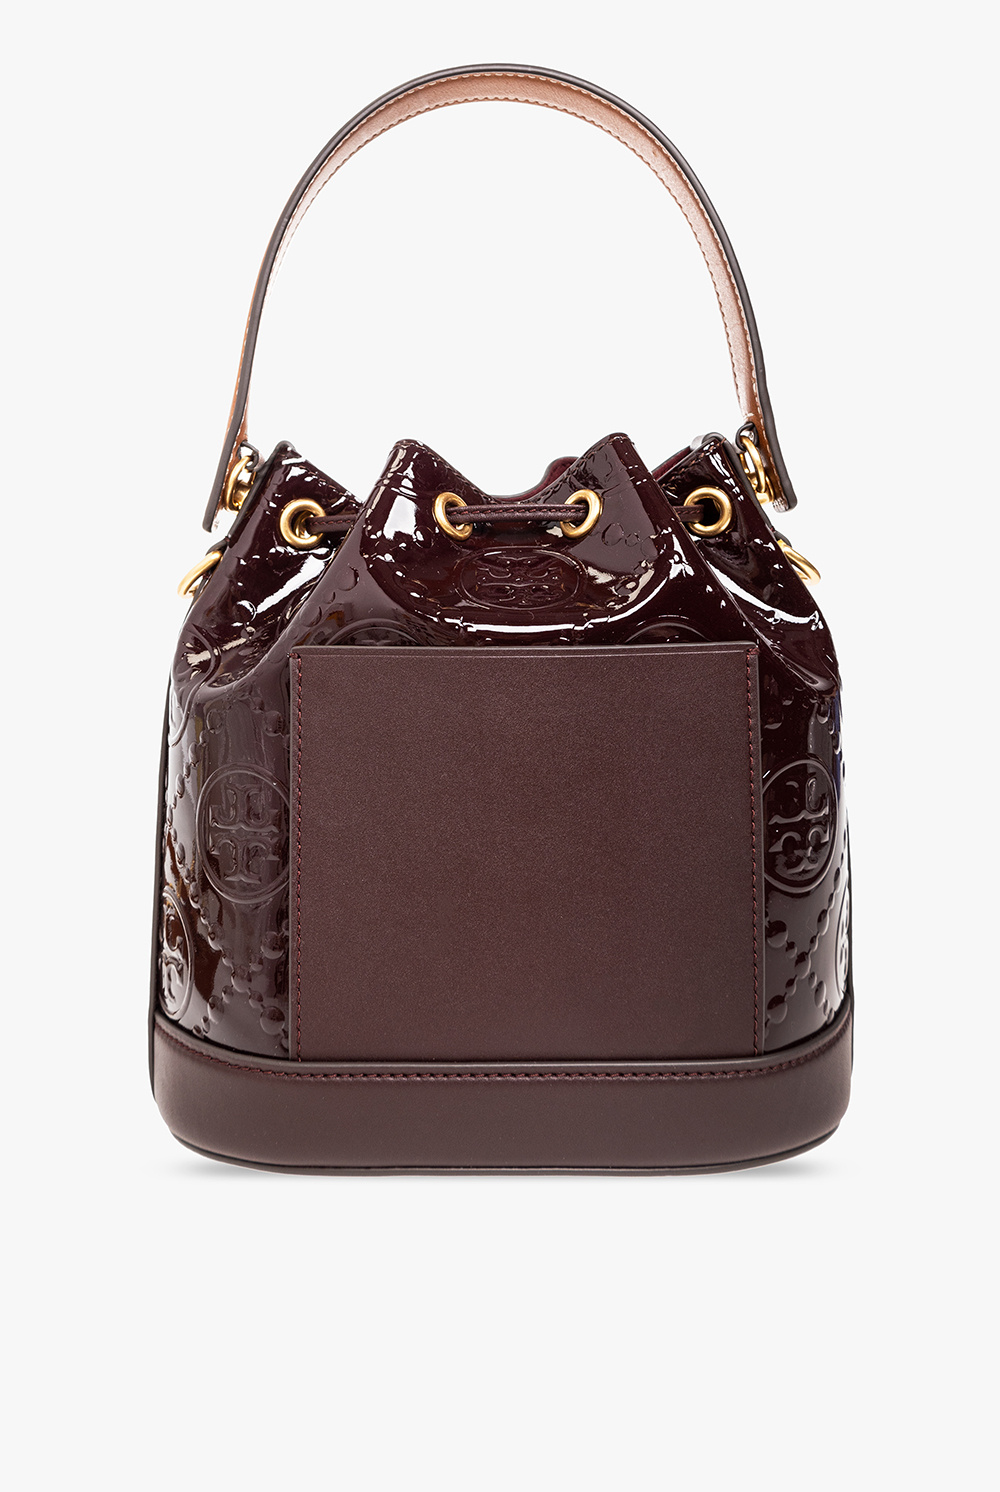 Tory Burch Bucket bag in patent leather